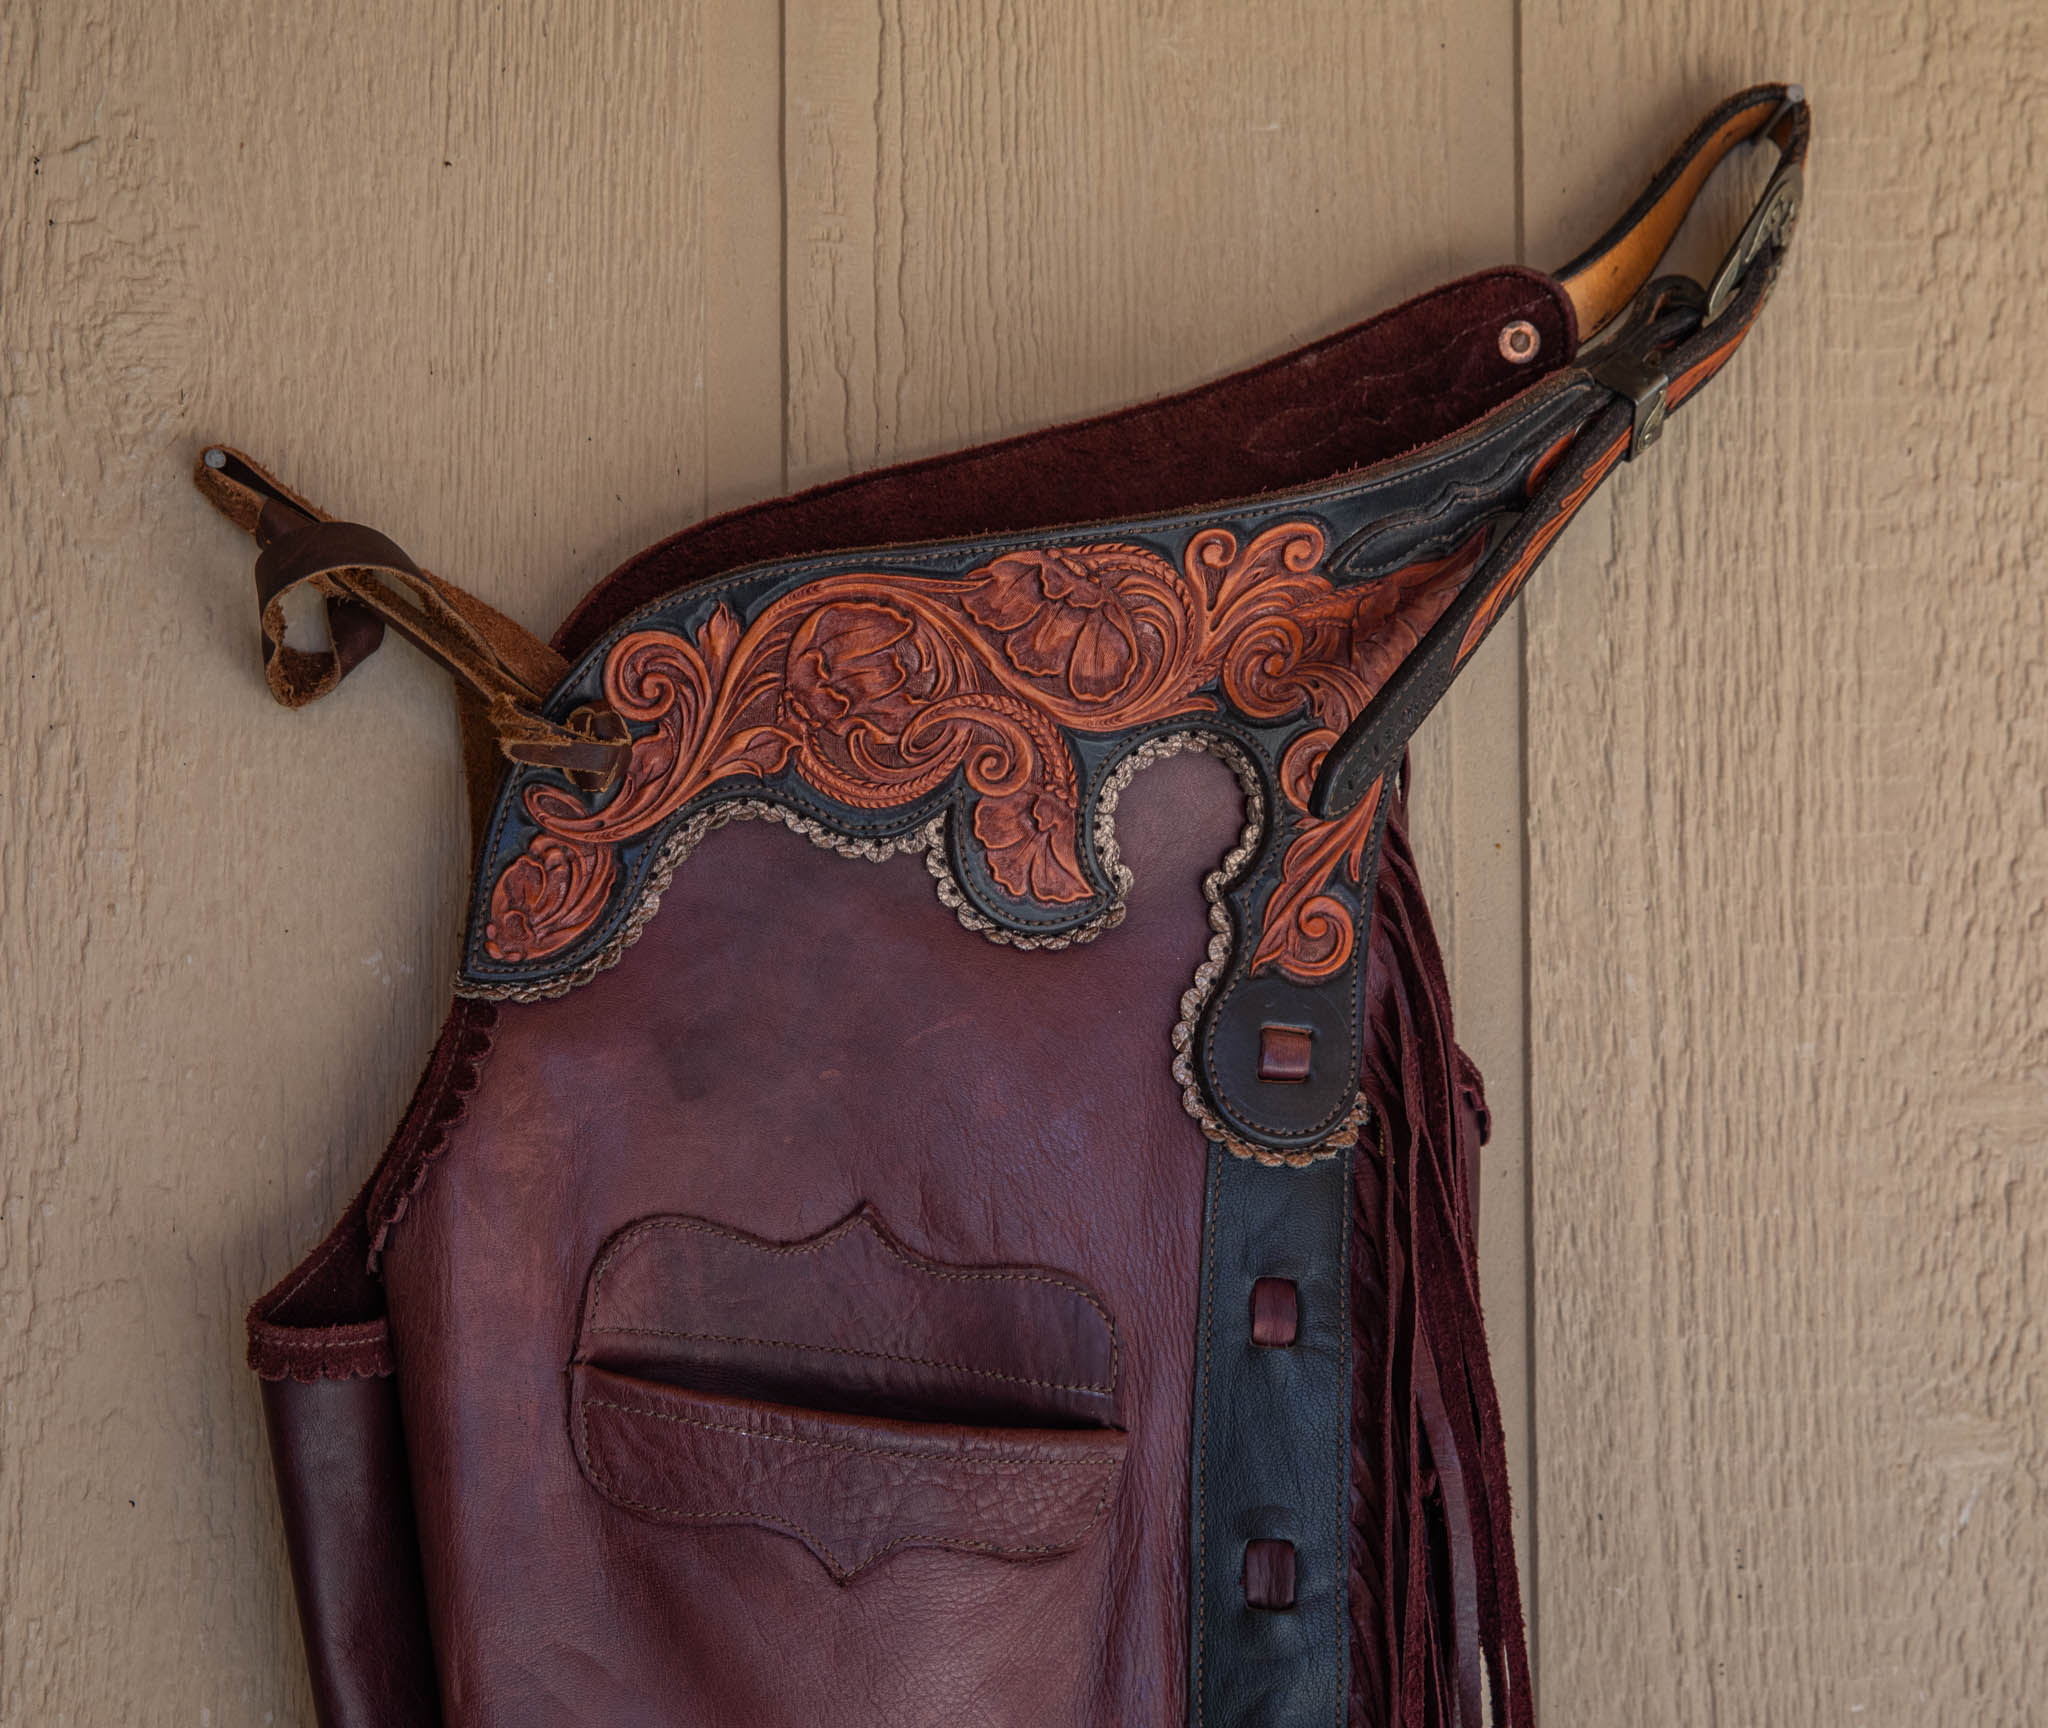 Burgundy Smooth-out Chaps w/ Black & Mahogany Floral Yokes and Pocket